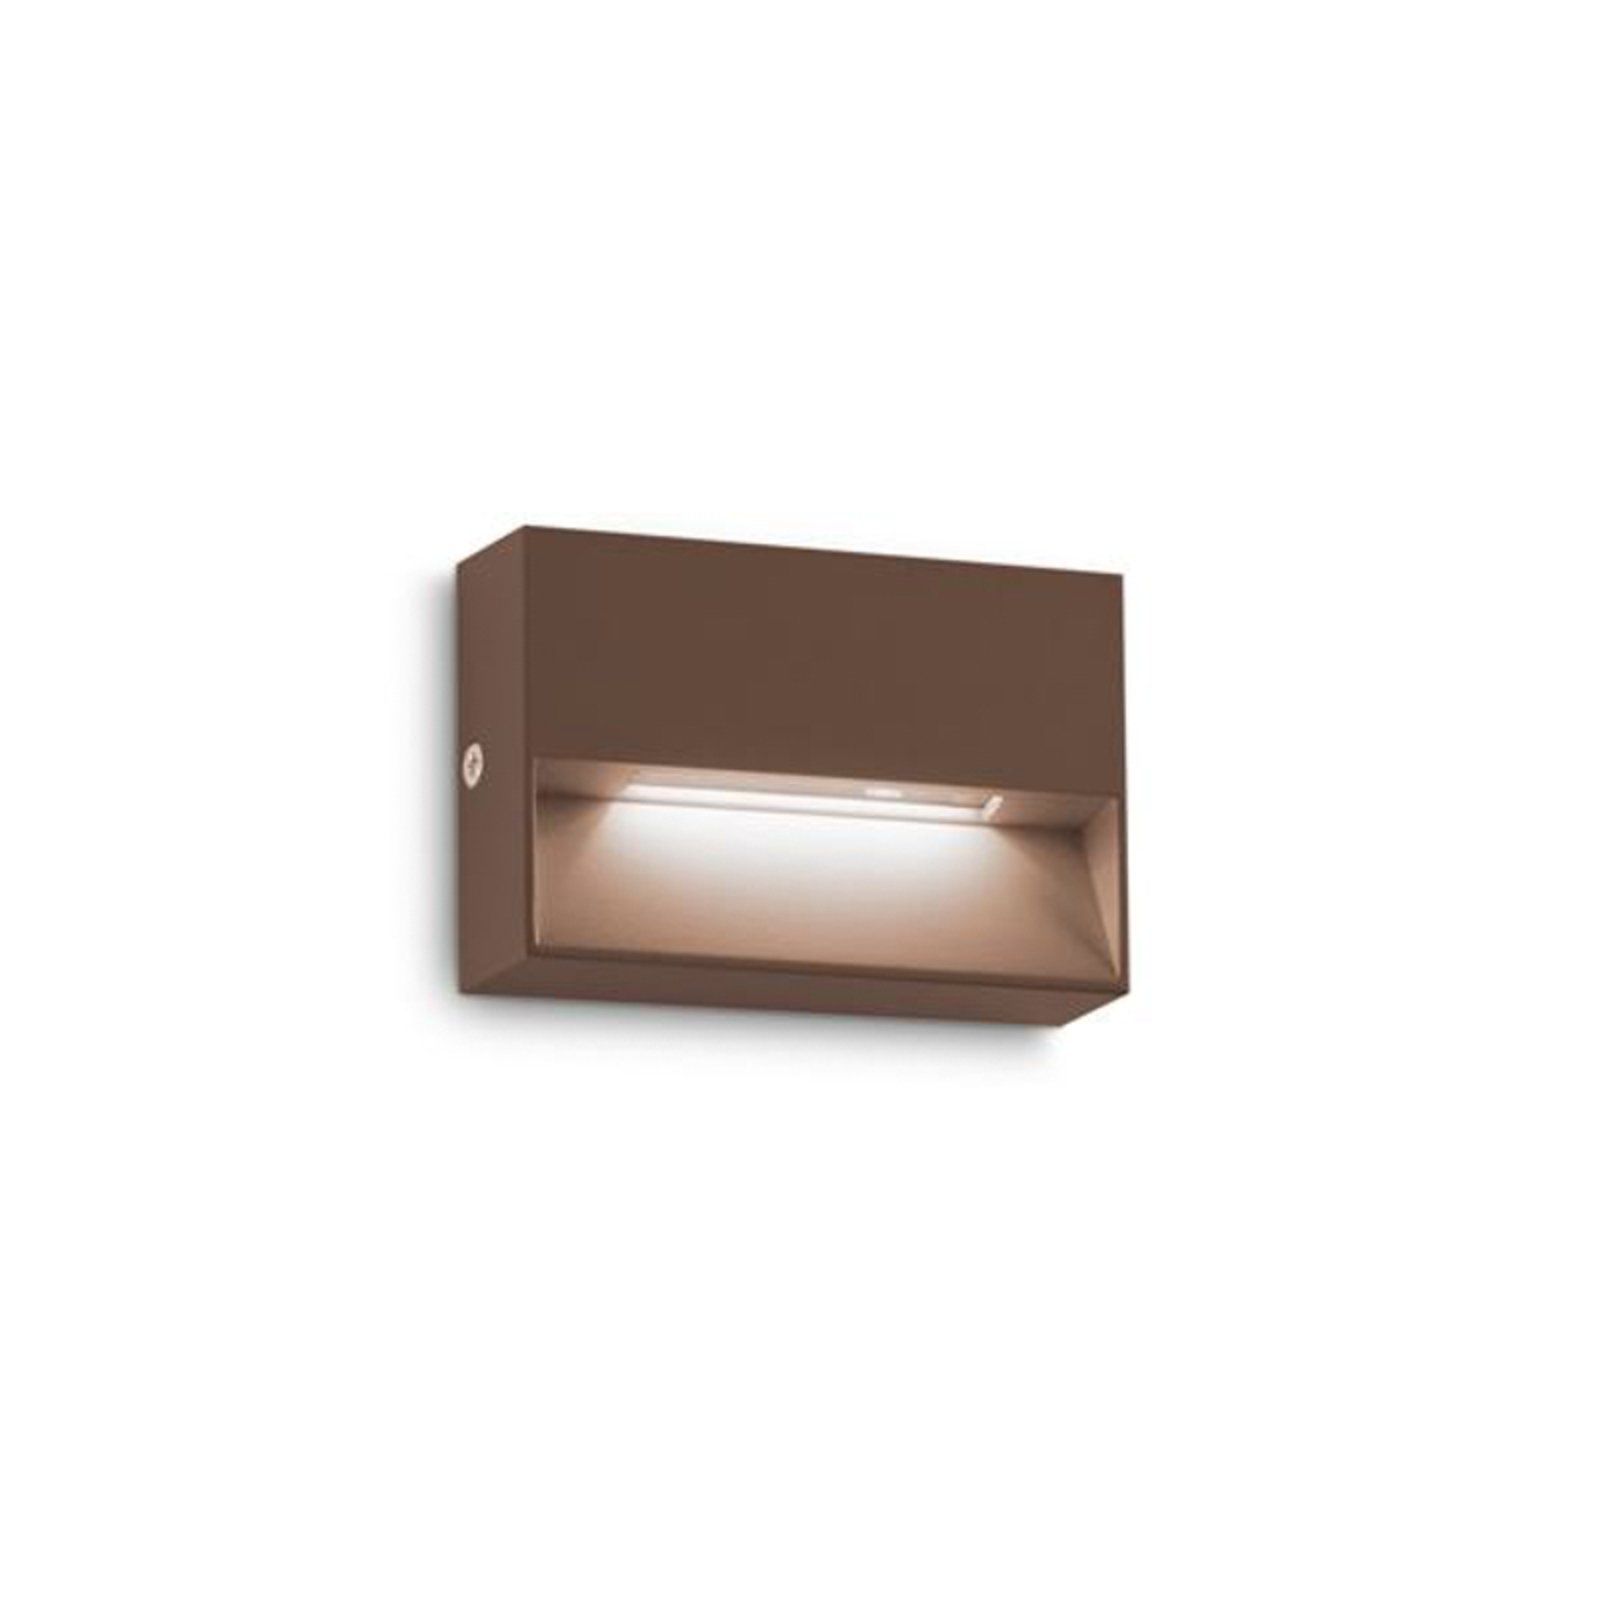 Ideal Lux LED outdoor wall light Dedra, brown, 10 x 6.5 cm